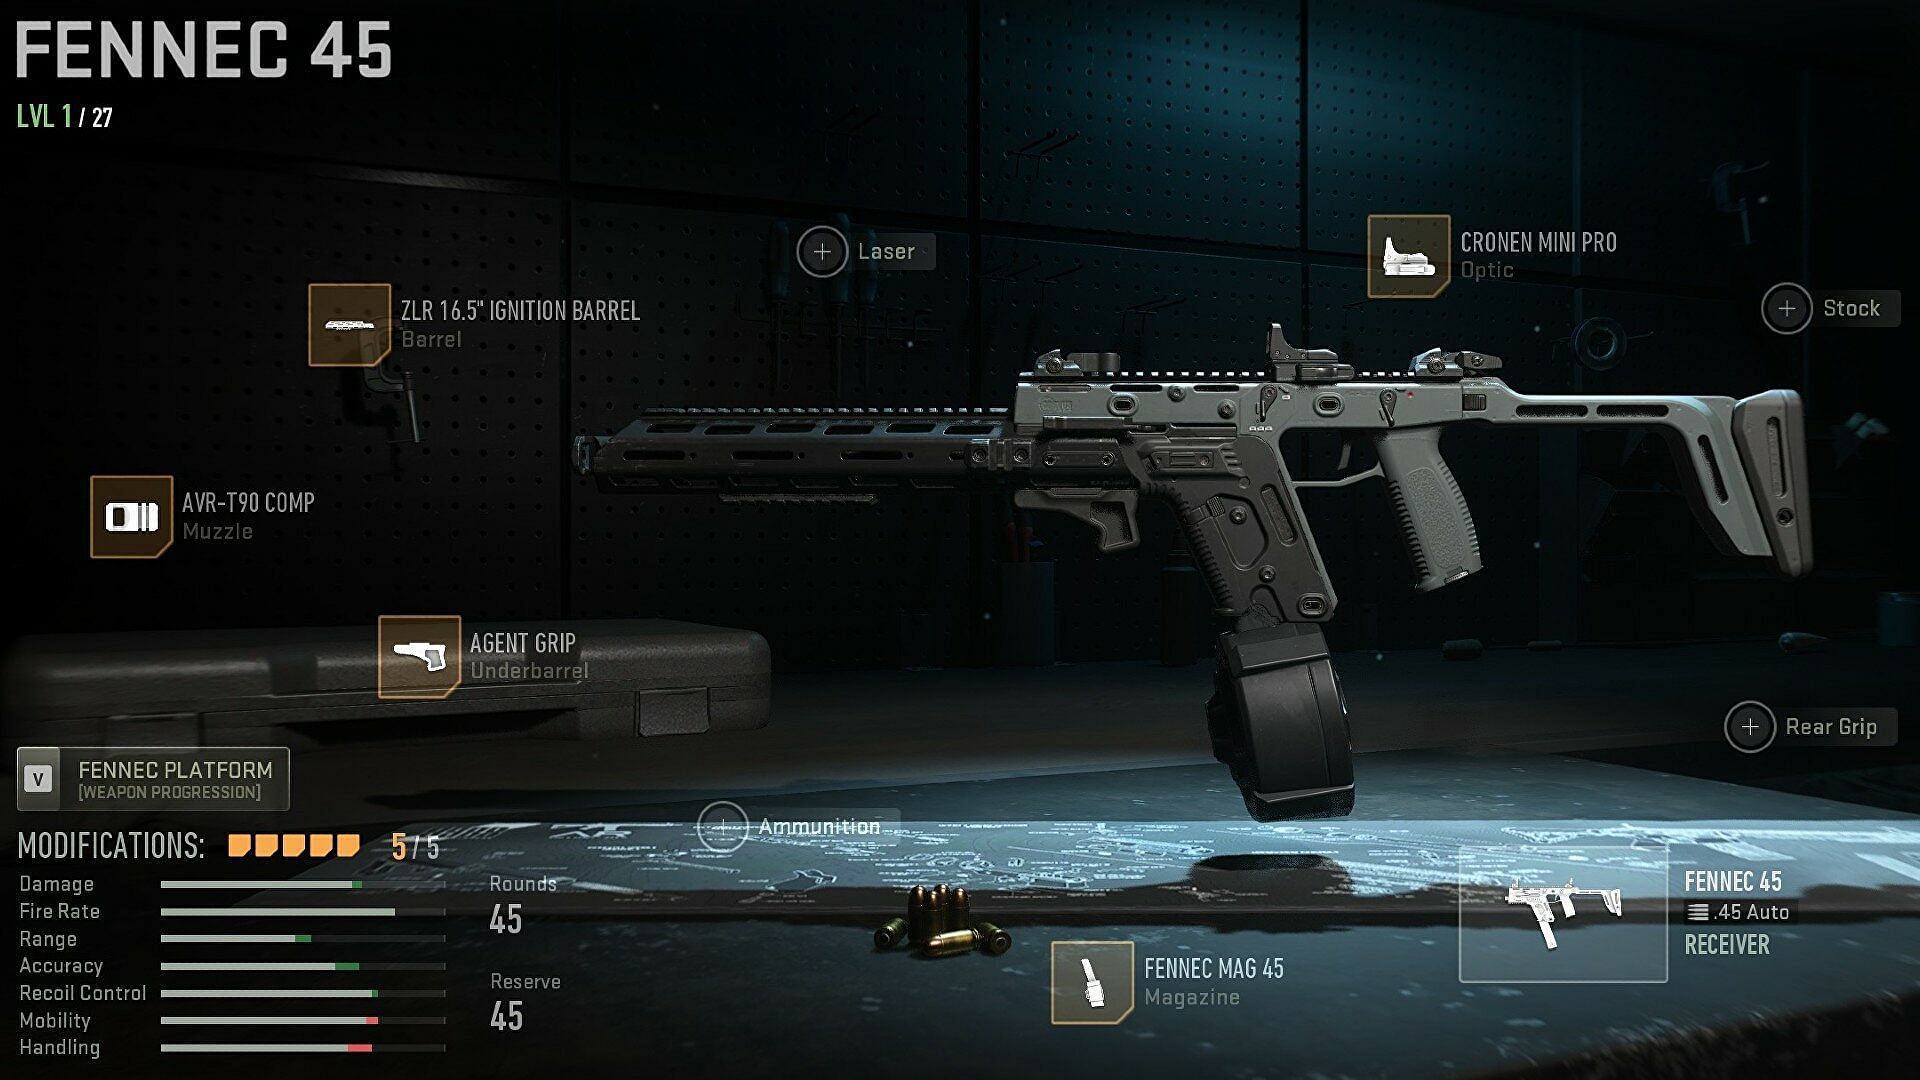 Fennec 45 loadout in MW2 (Image via Activision)